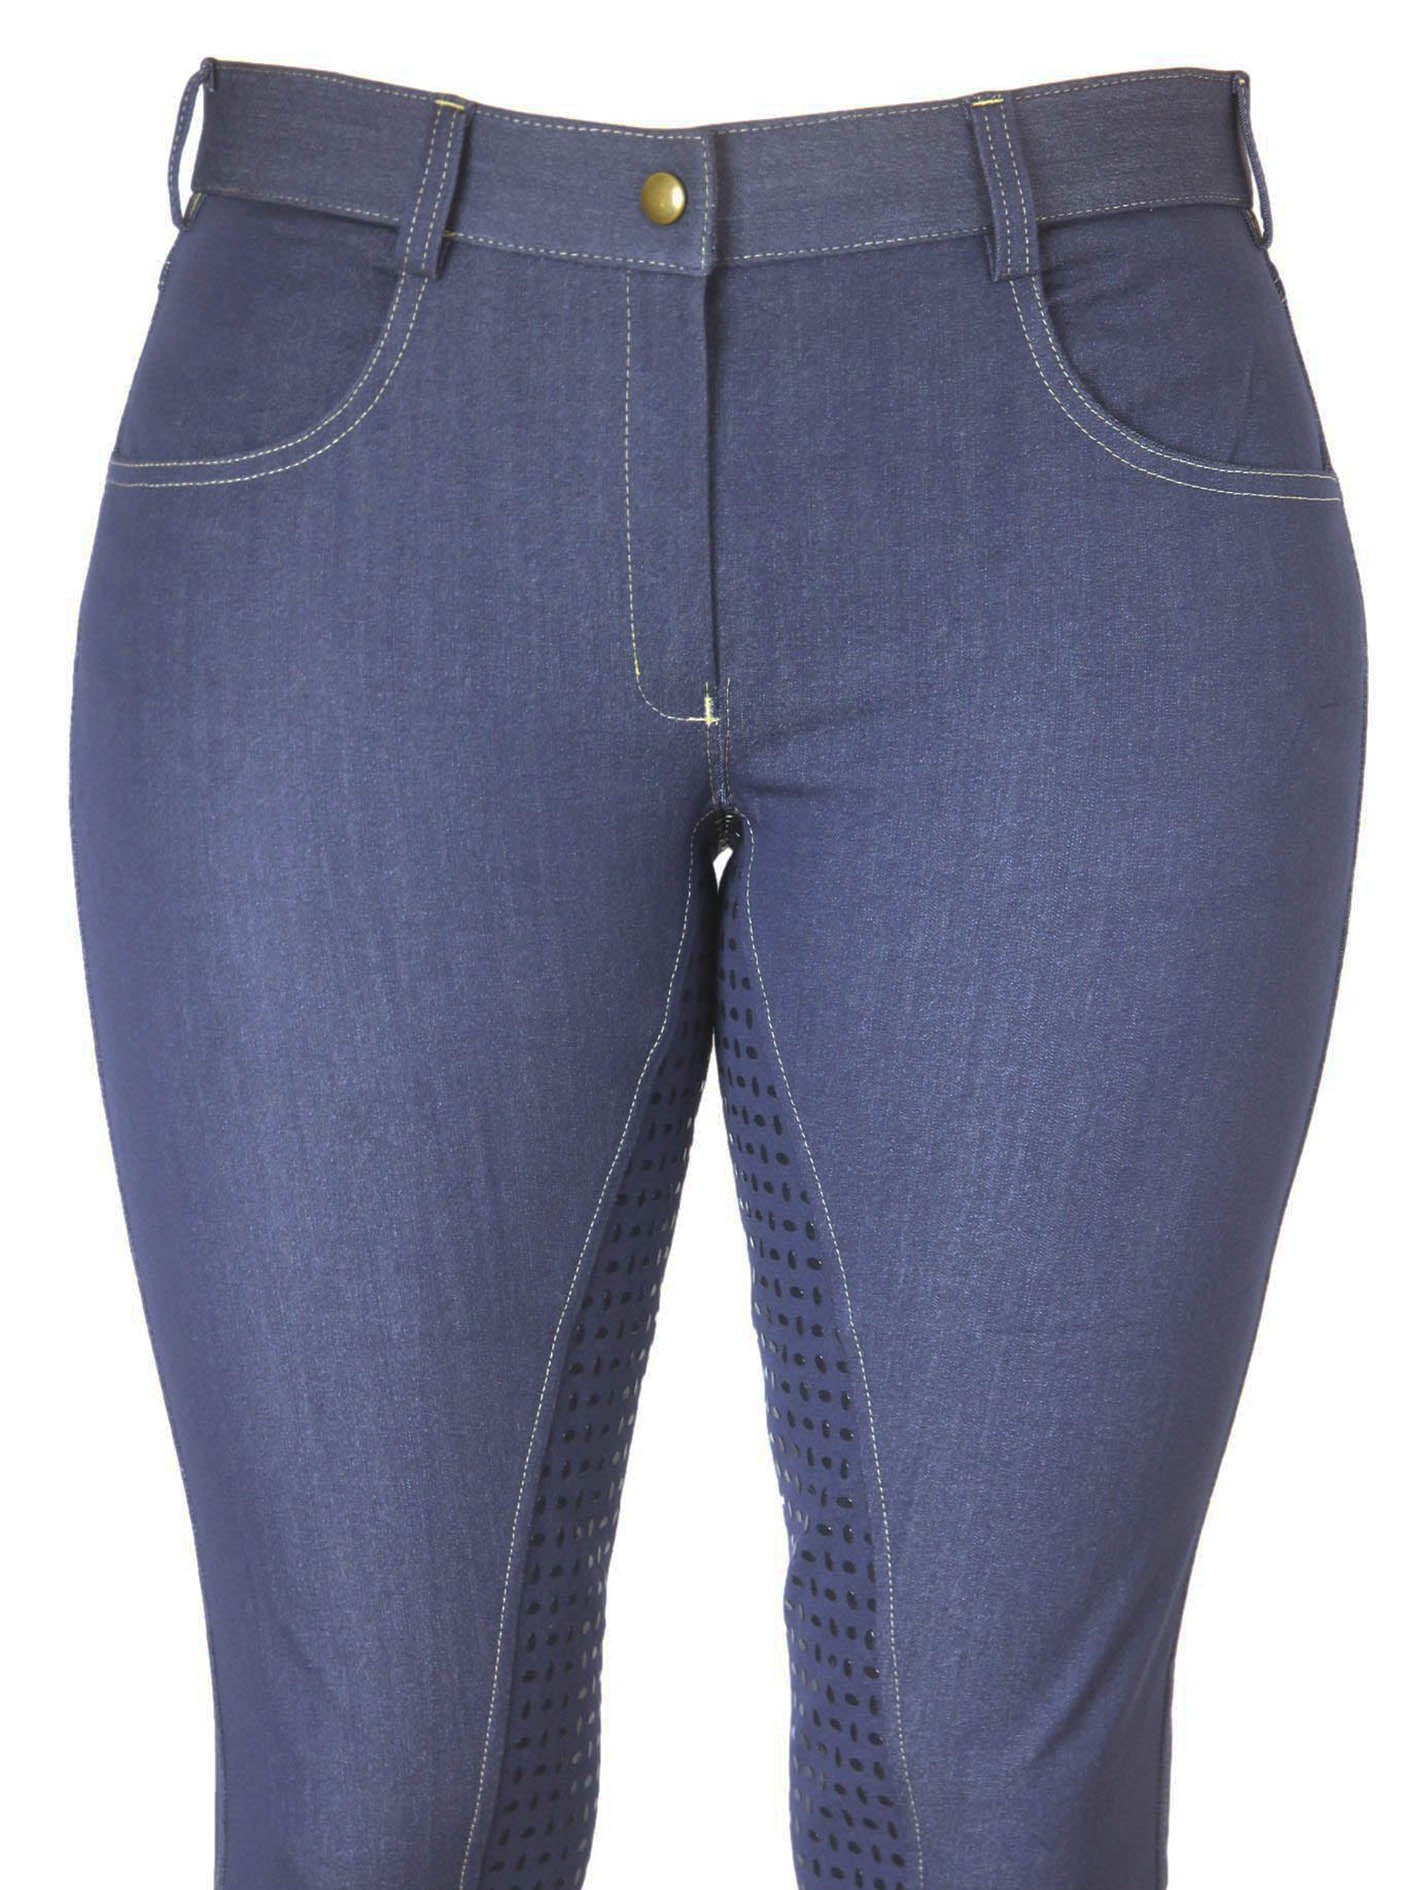 Denim Jodhpurs with Silicone seat Classic Jeans pockets-Plum Tack-The Equestrian